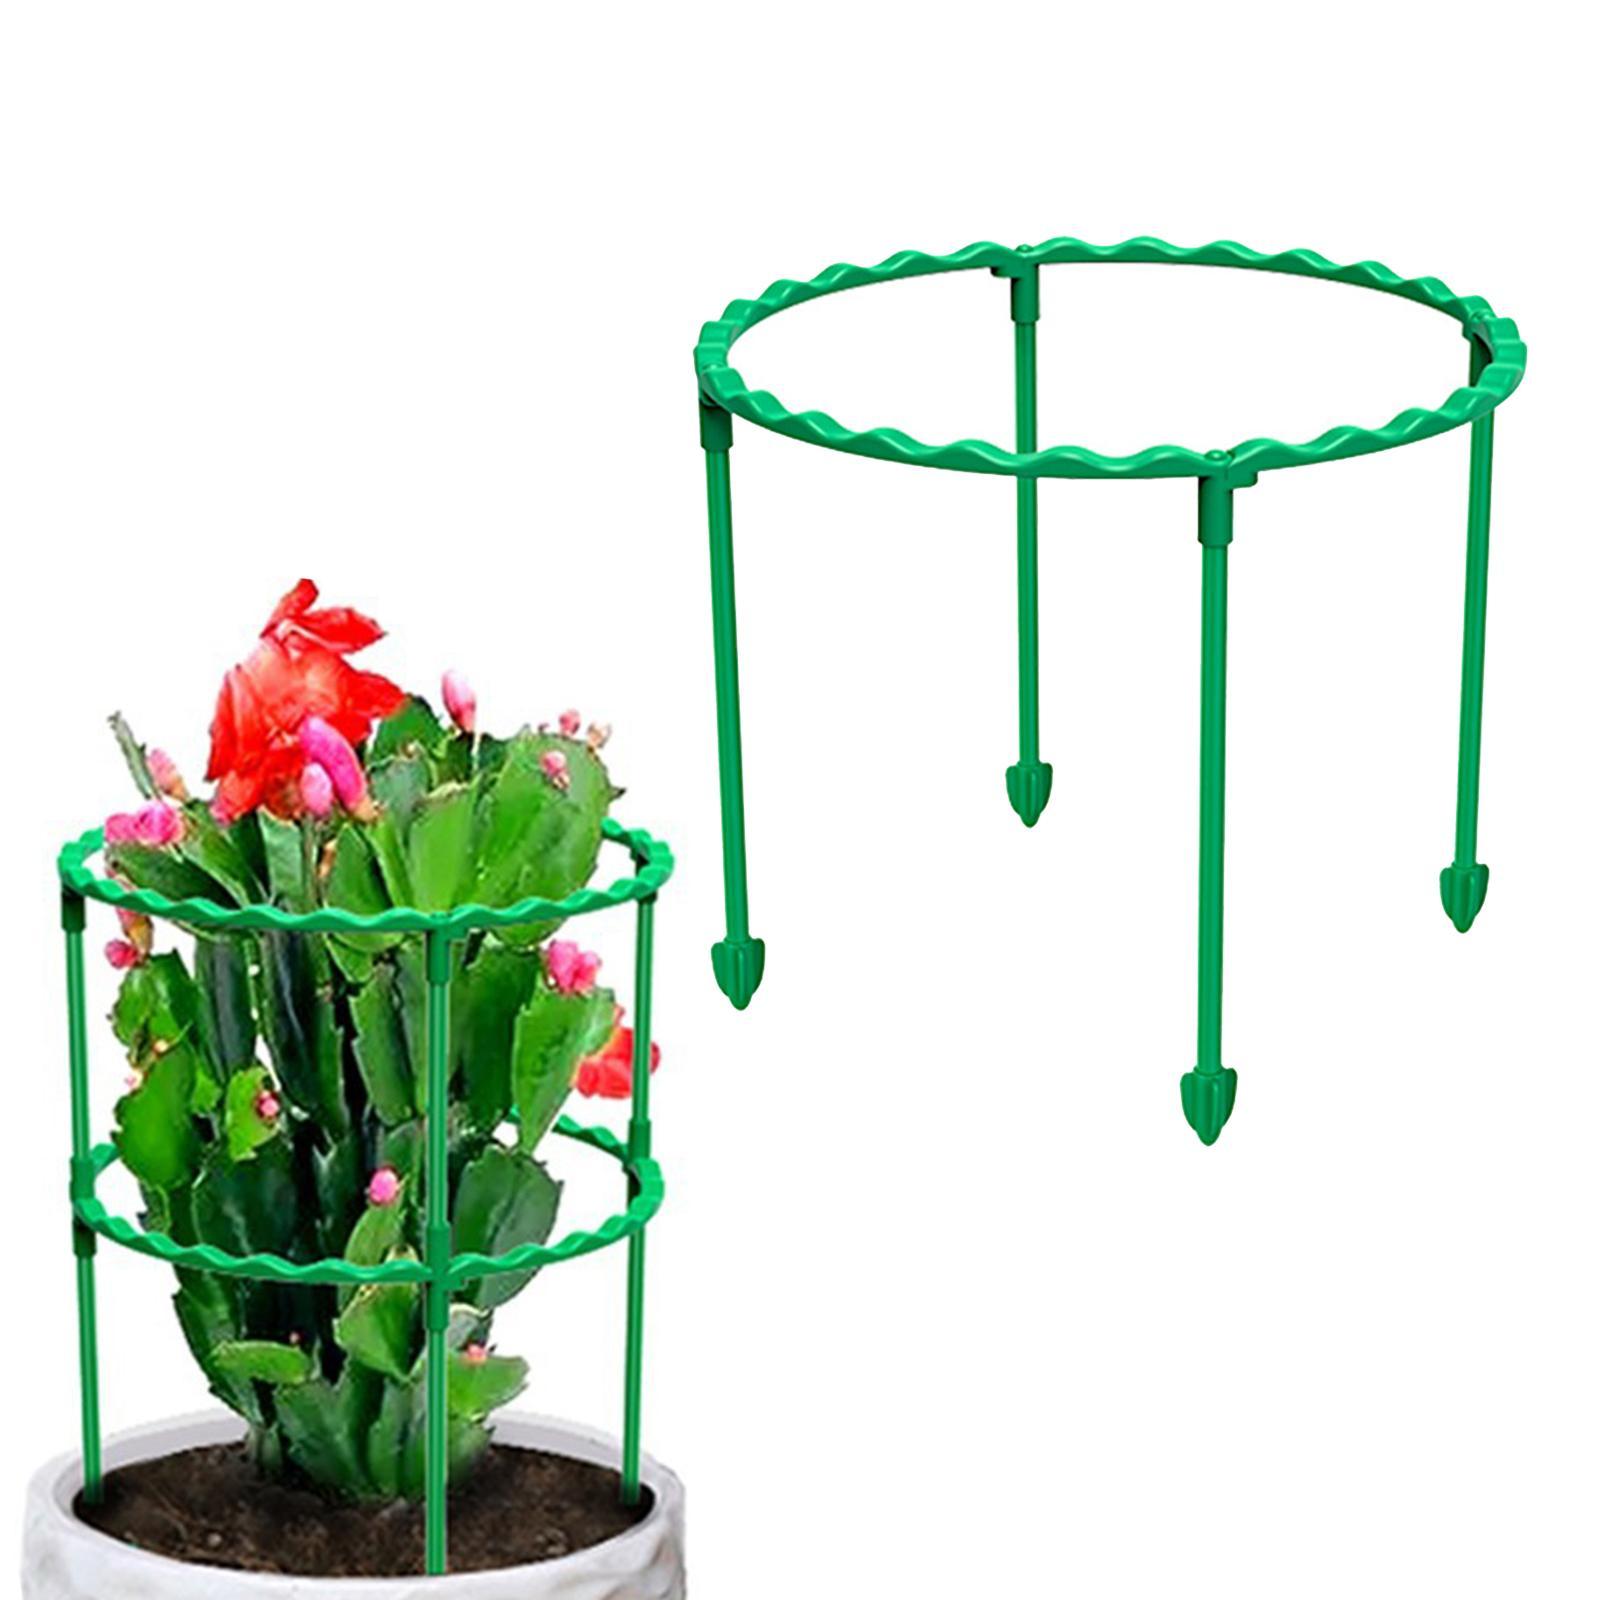 Tomato Growing Cage Garden Plant Support Stakes for Potted Plants Vines Pots